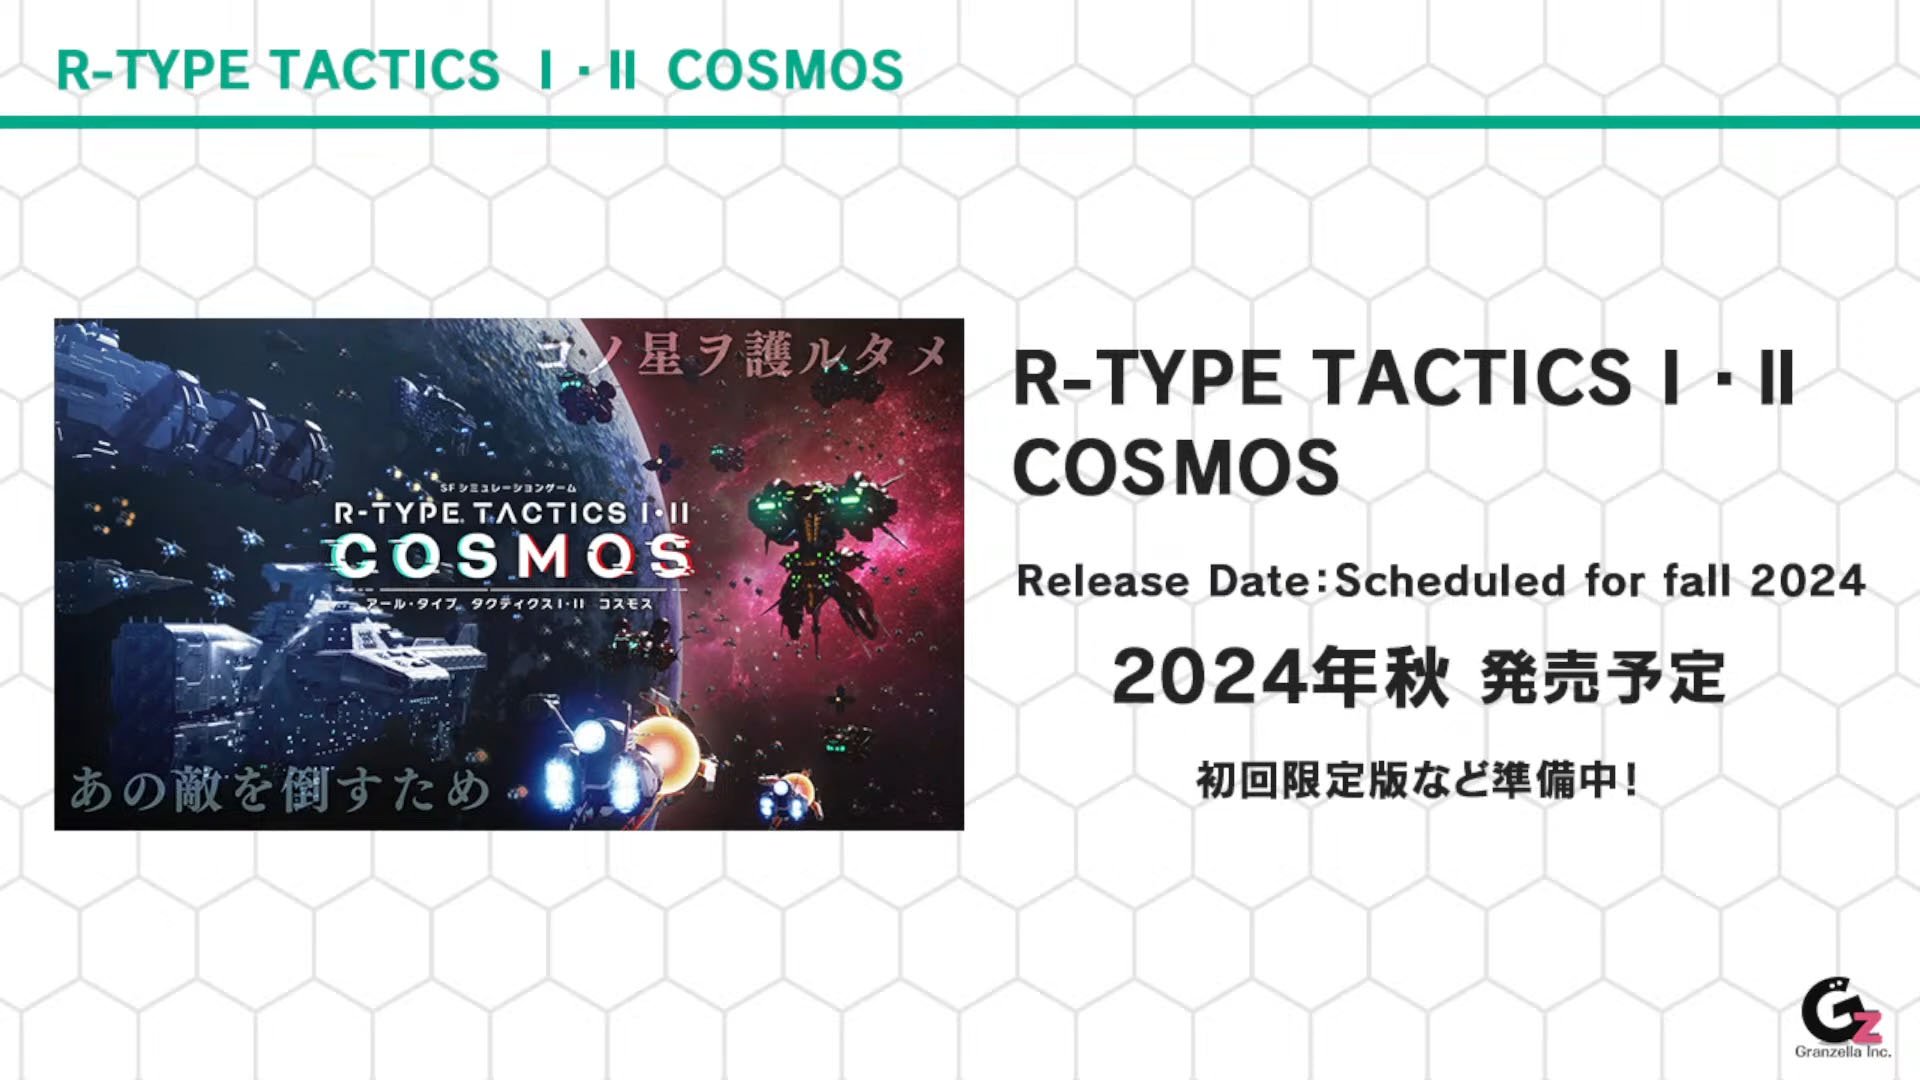 #
      R-Type Tactics I • II Cosmos launches in fall 2024